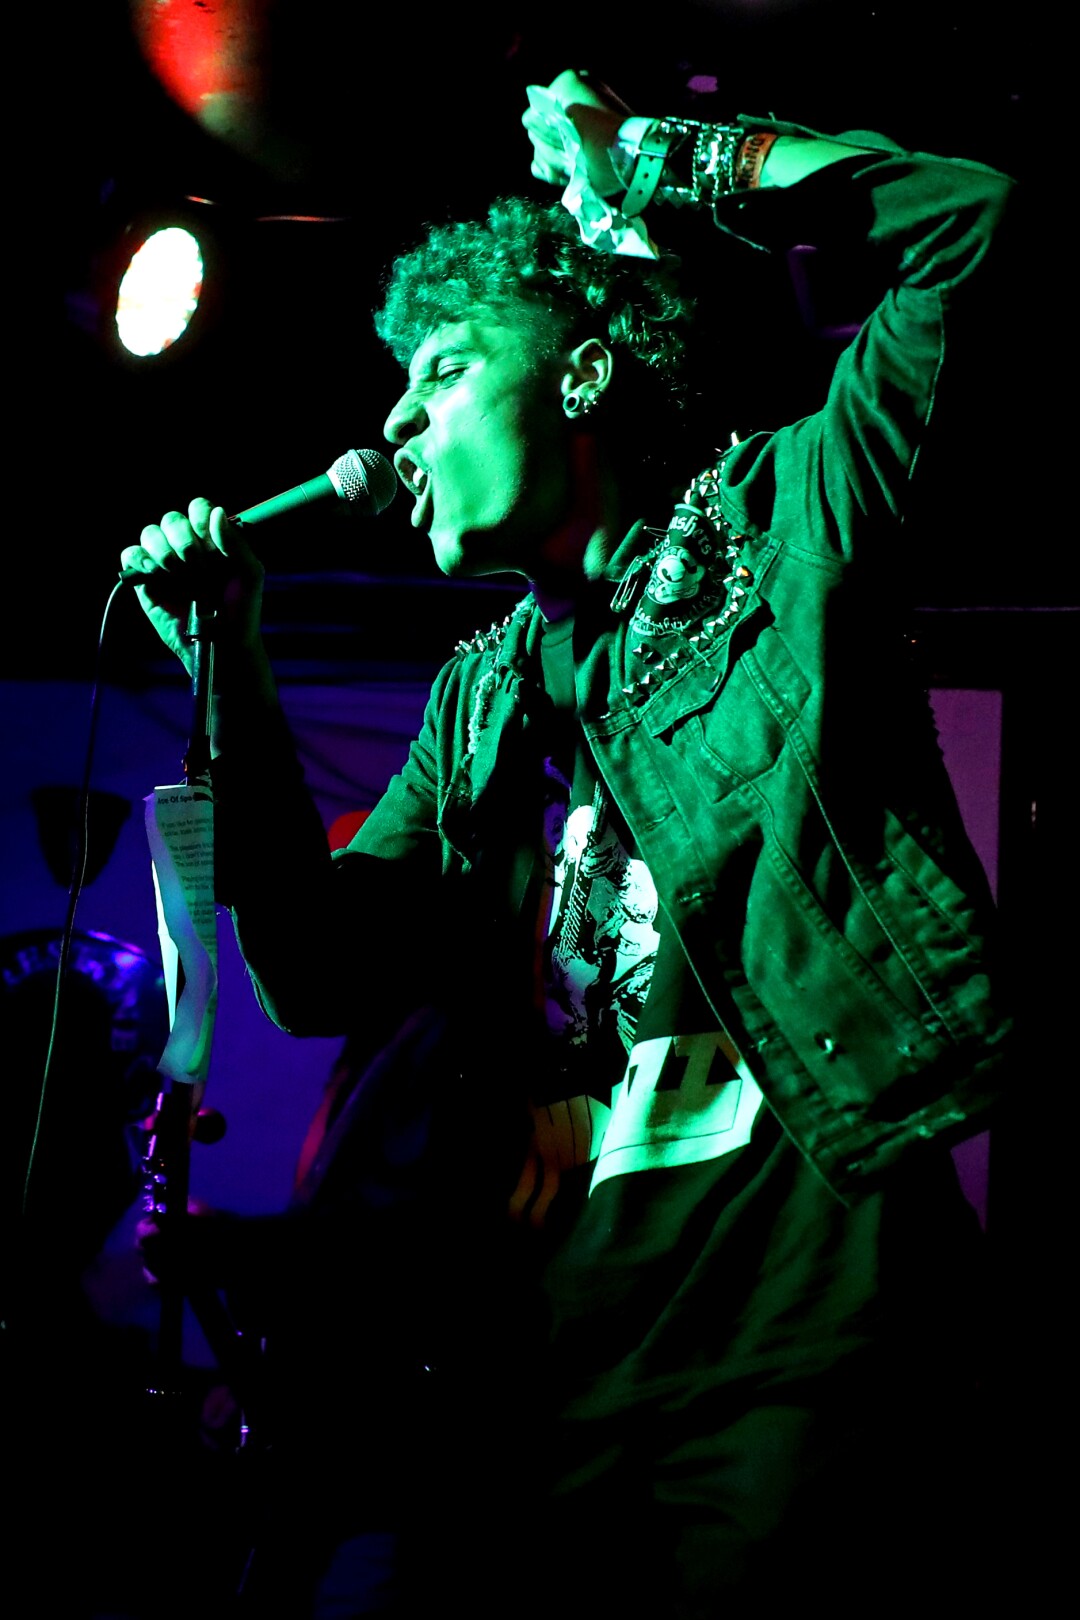 A man sings into a green light on a stage